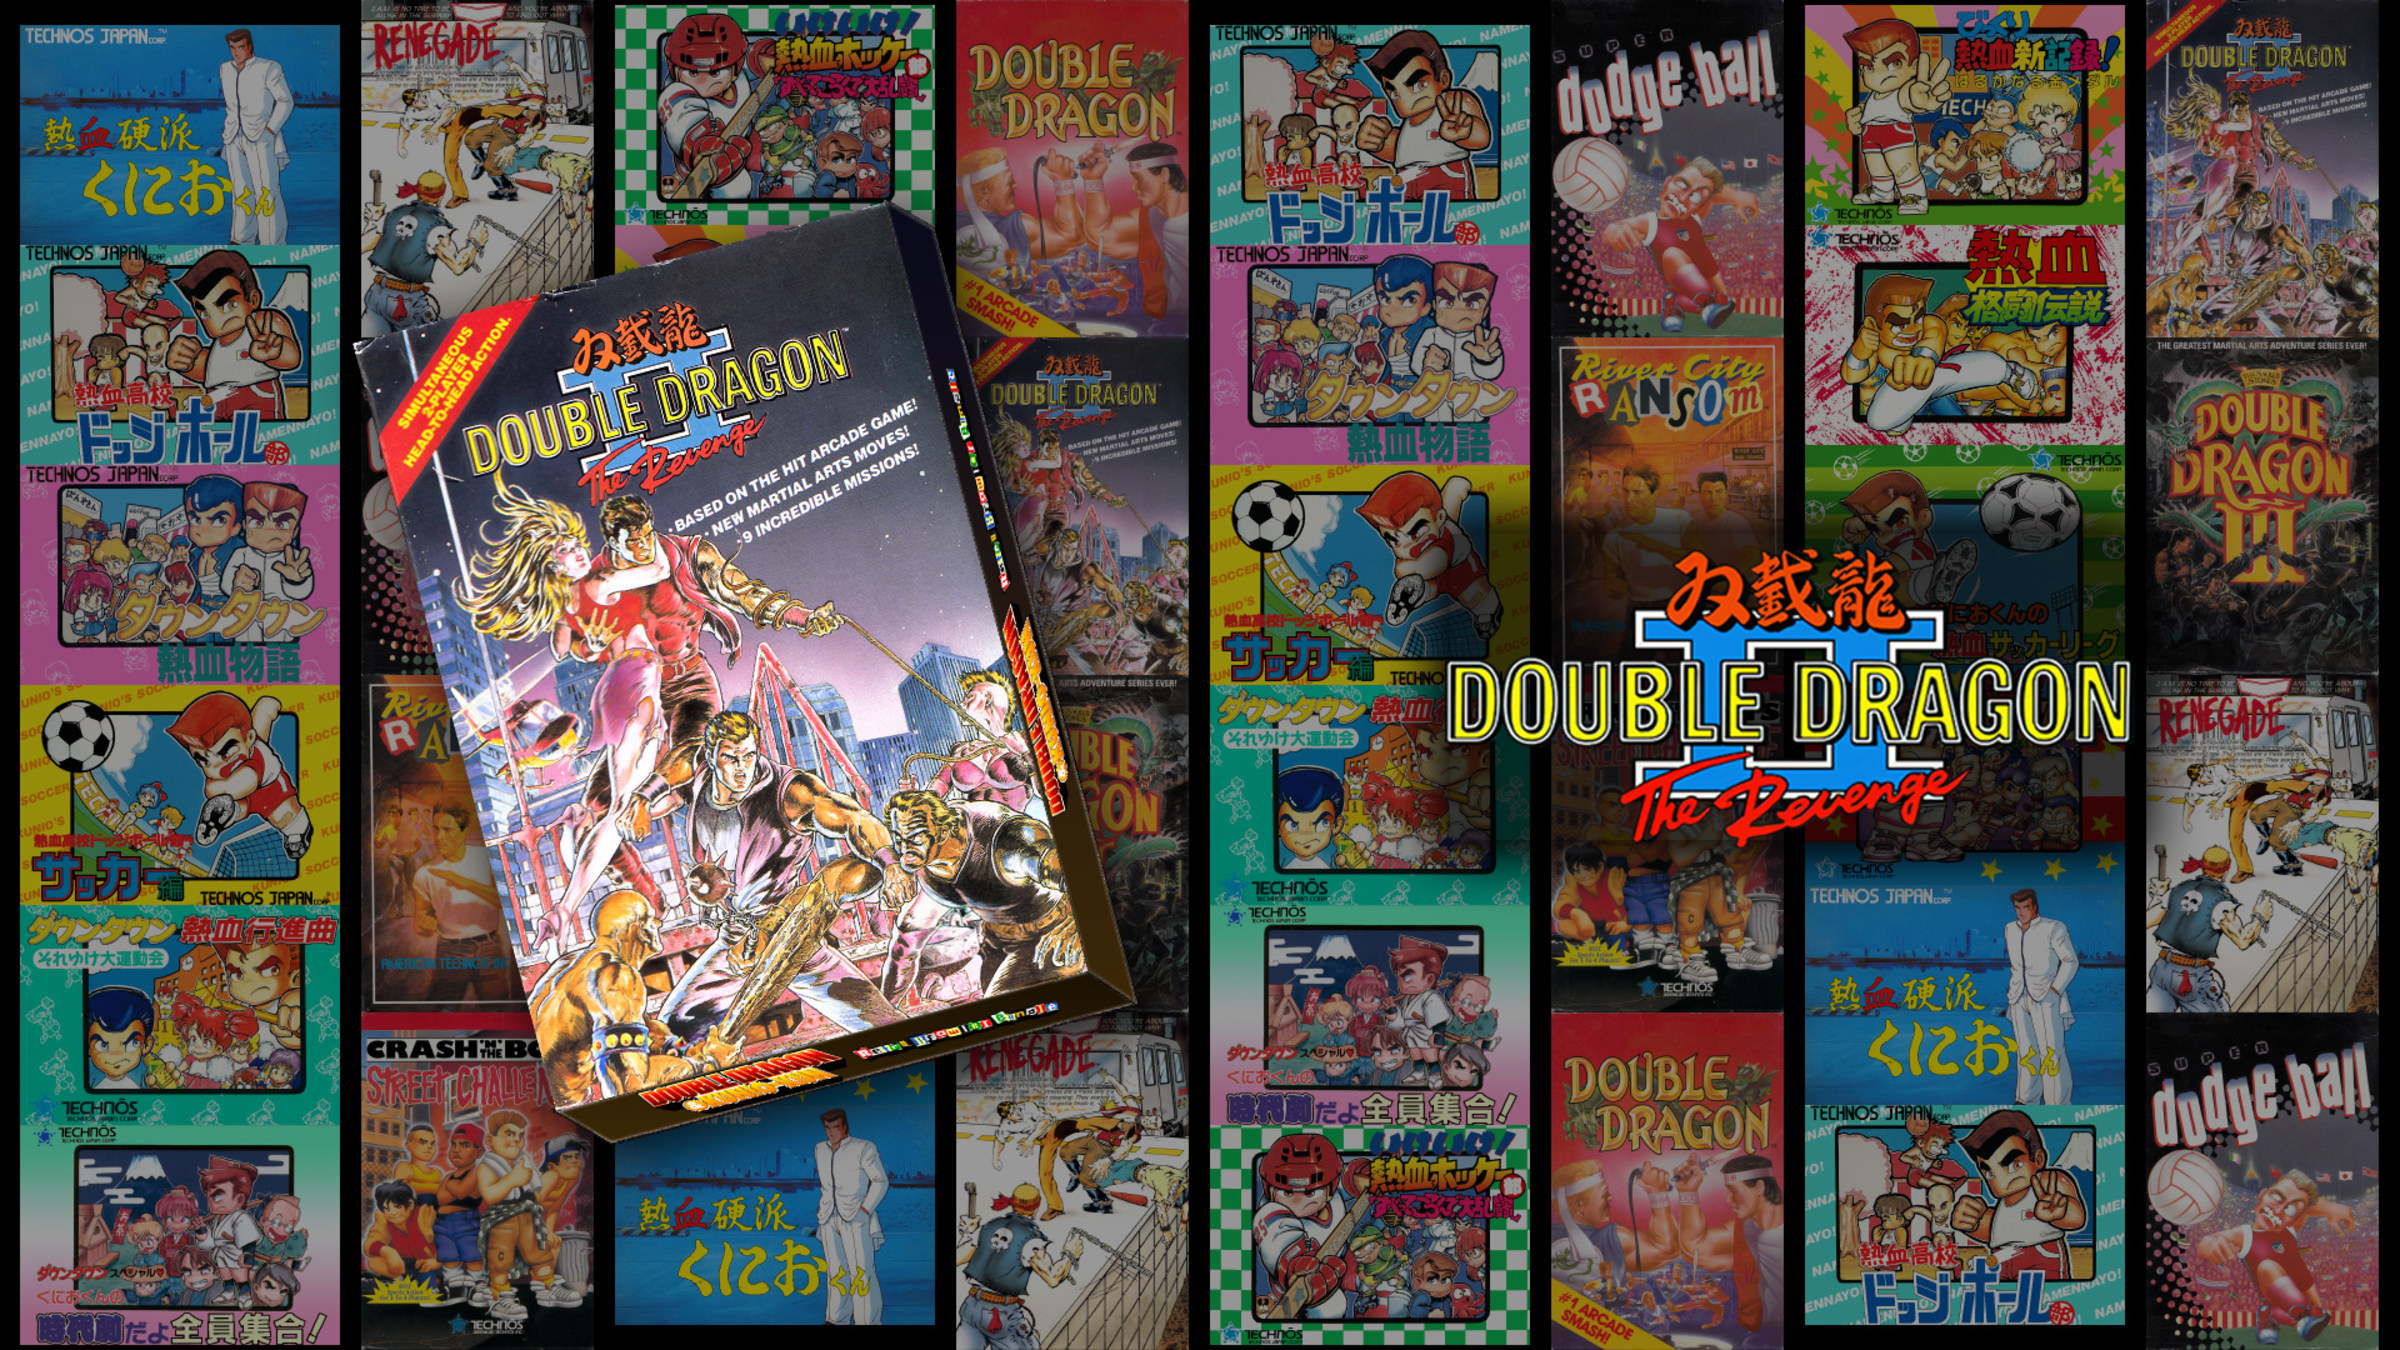 DOUBLE DRAGON Ⅱ: The Revenge for Nintendo Switch - Nintendo Official Site